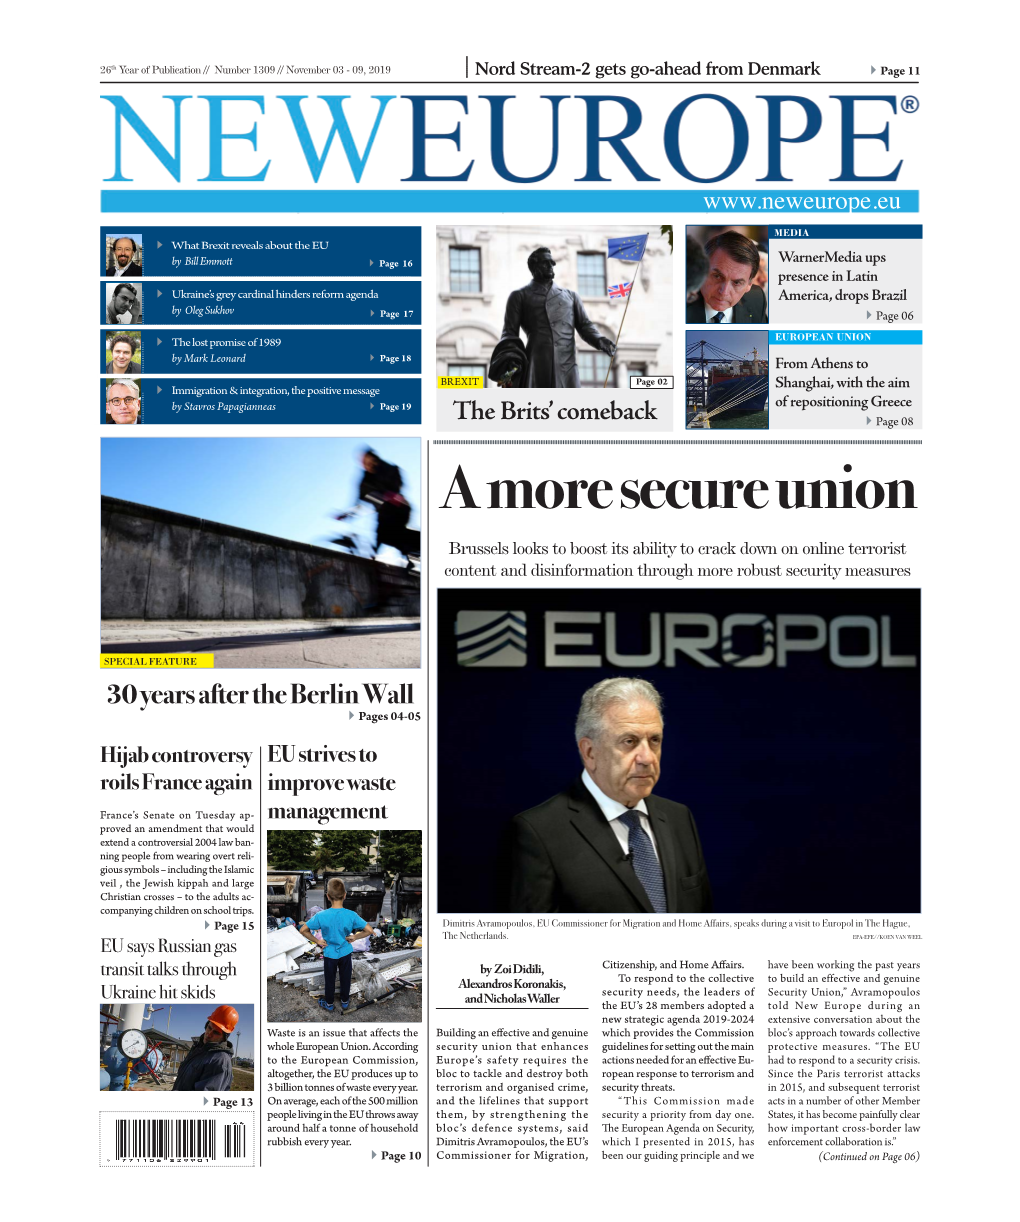 A More Secure Union: Interview by Commissioner Avramopoulos in New Europe, 3/11/2019